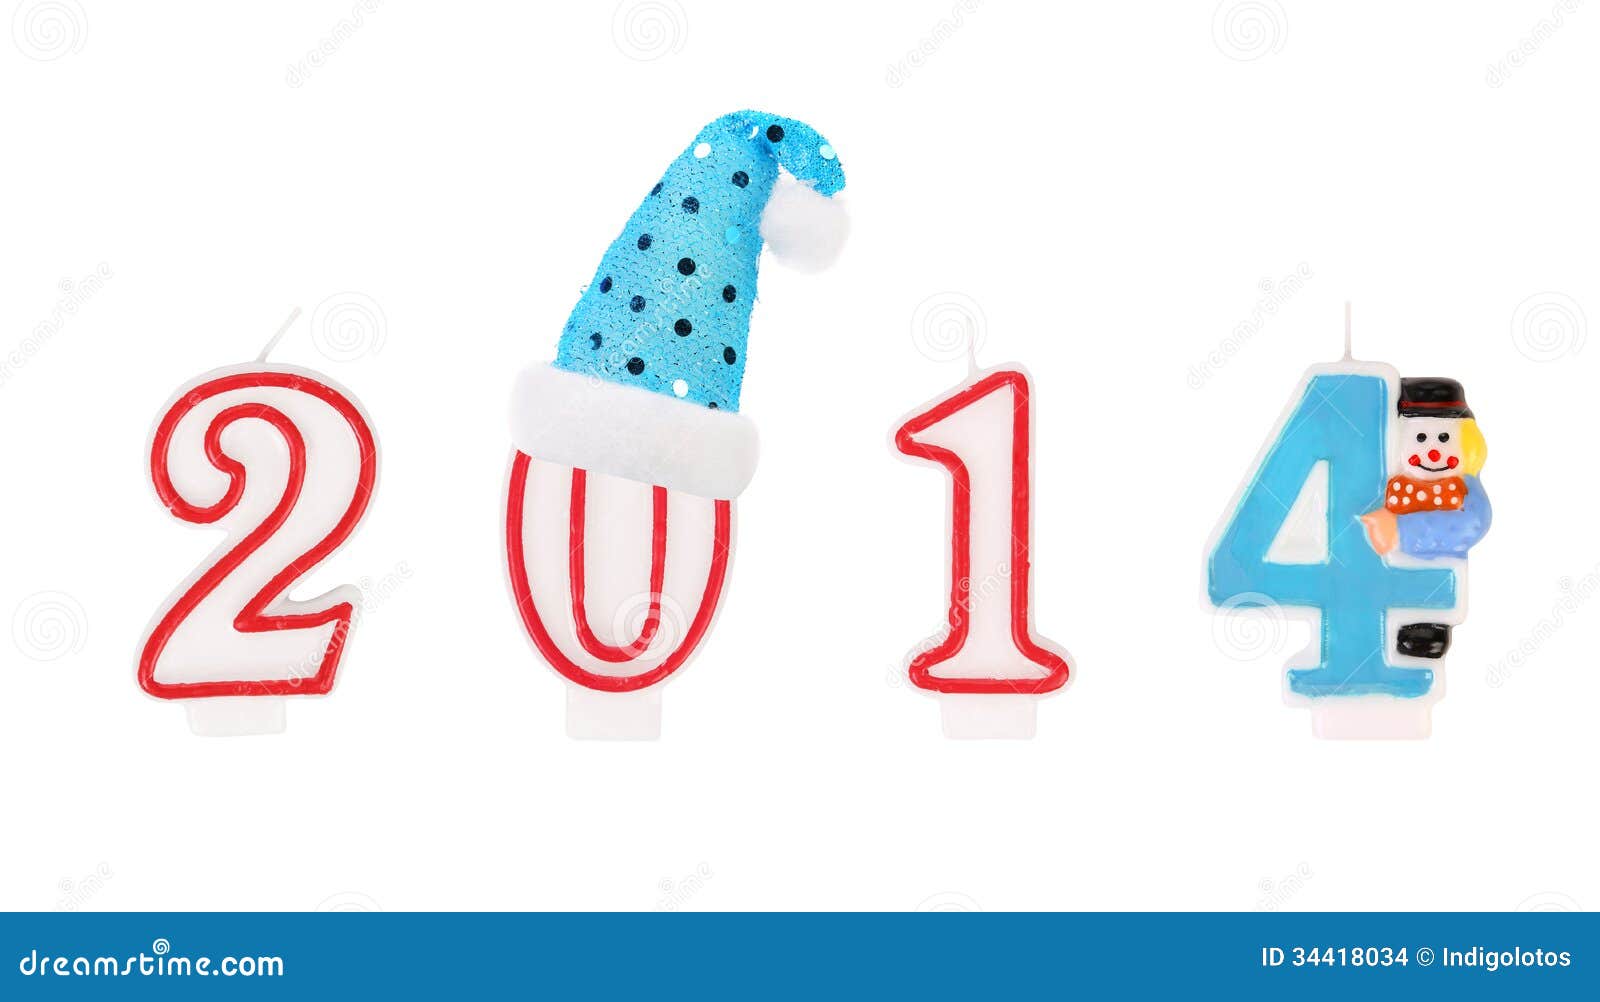 clipart new years eve 2014 - photo #26